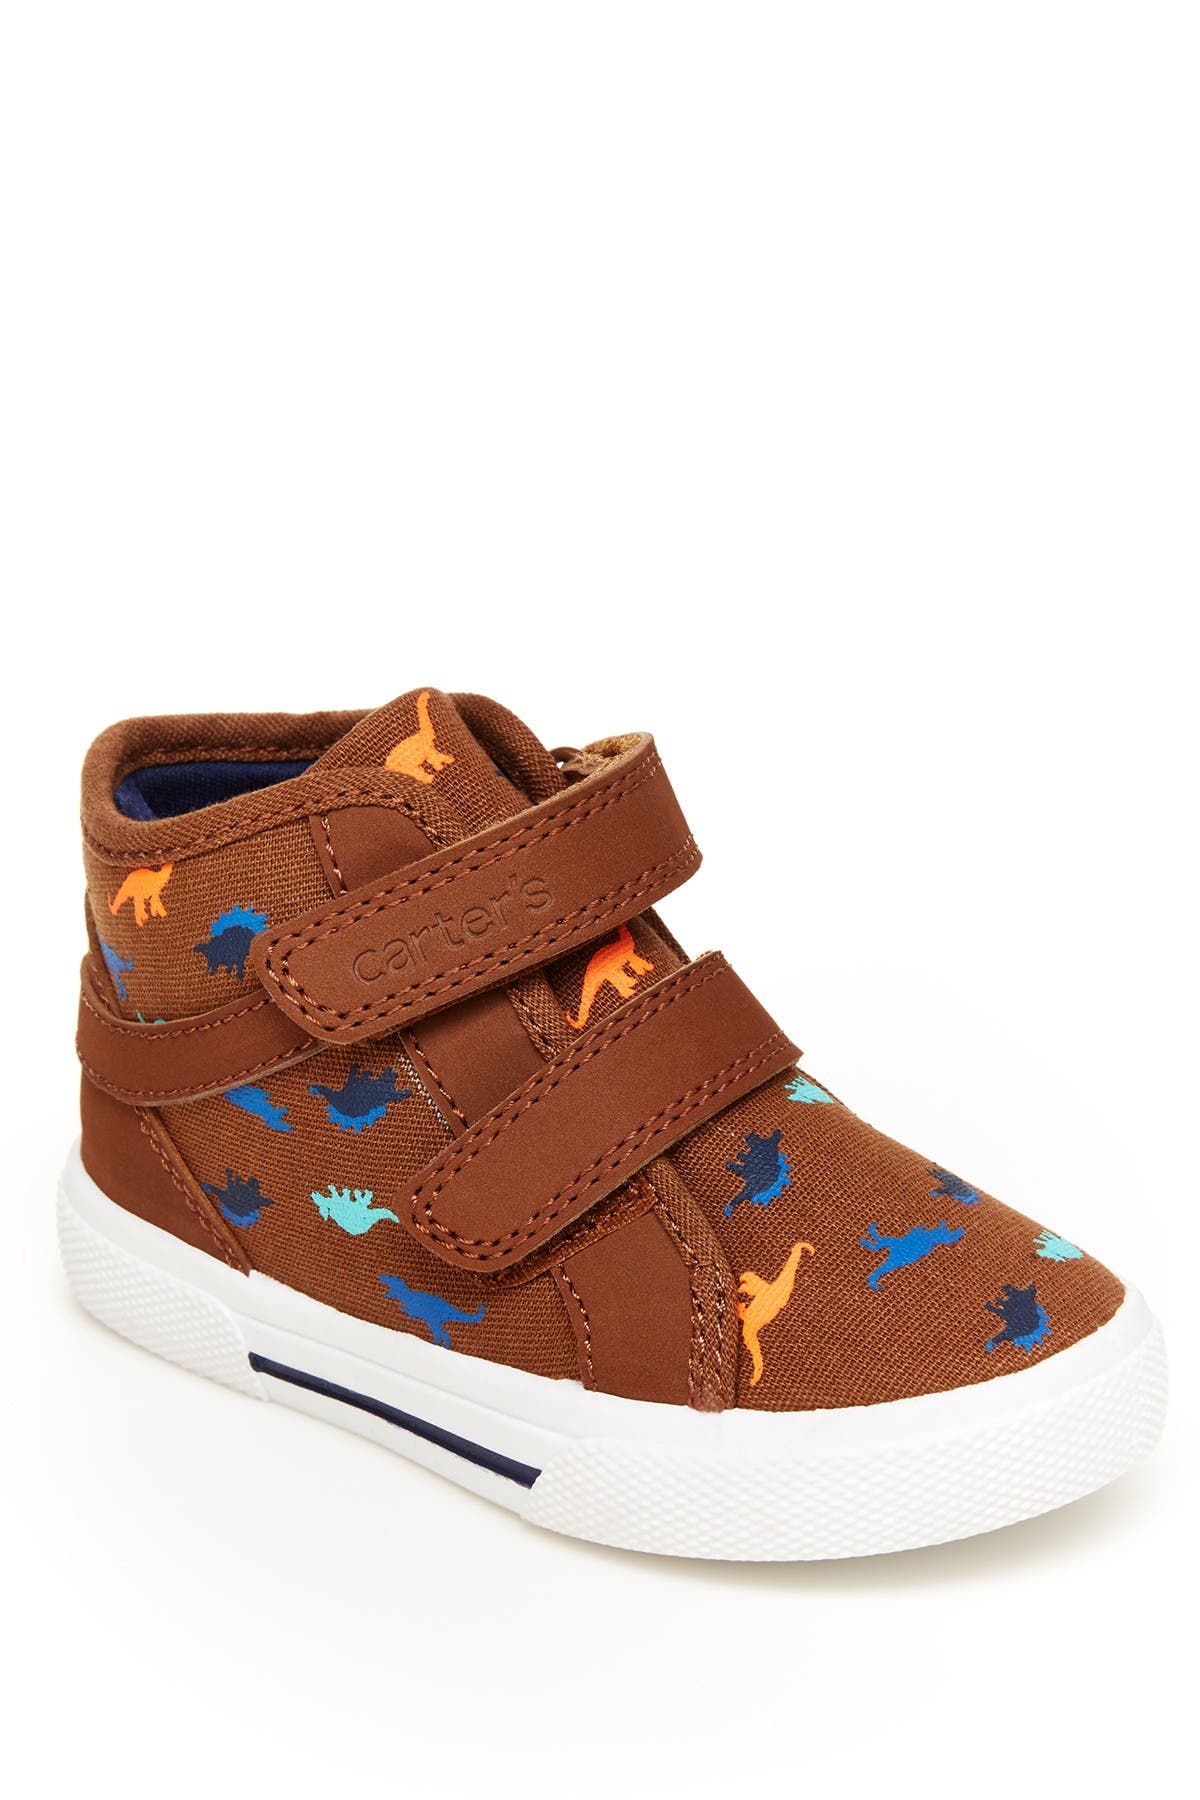 dinosaur sneakers for toddlers